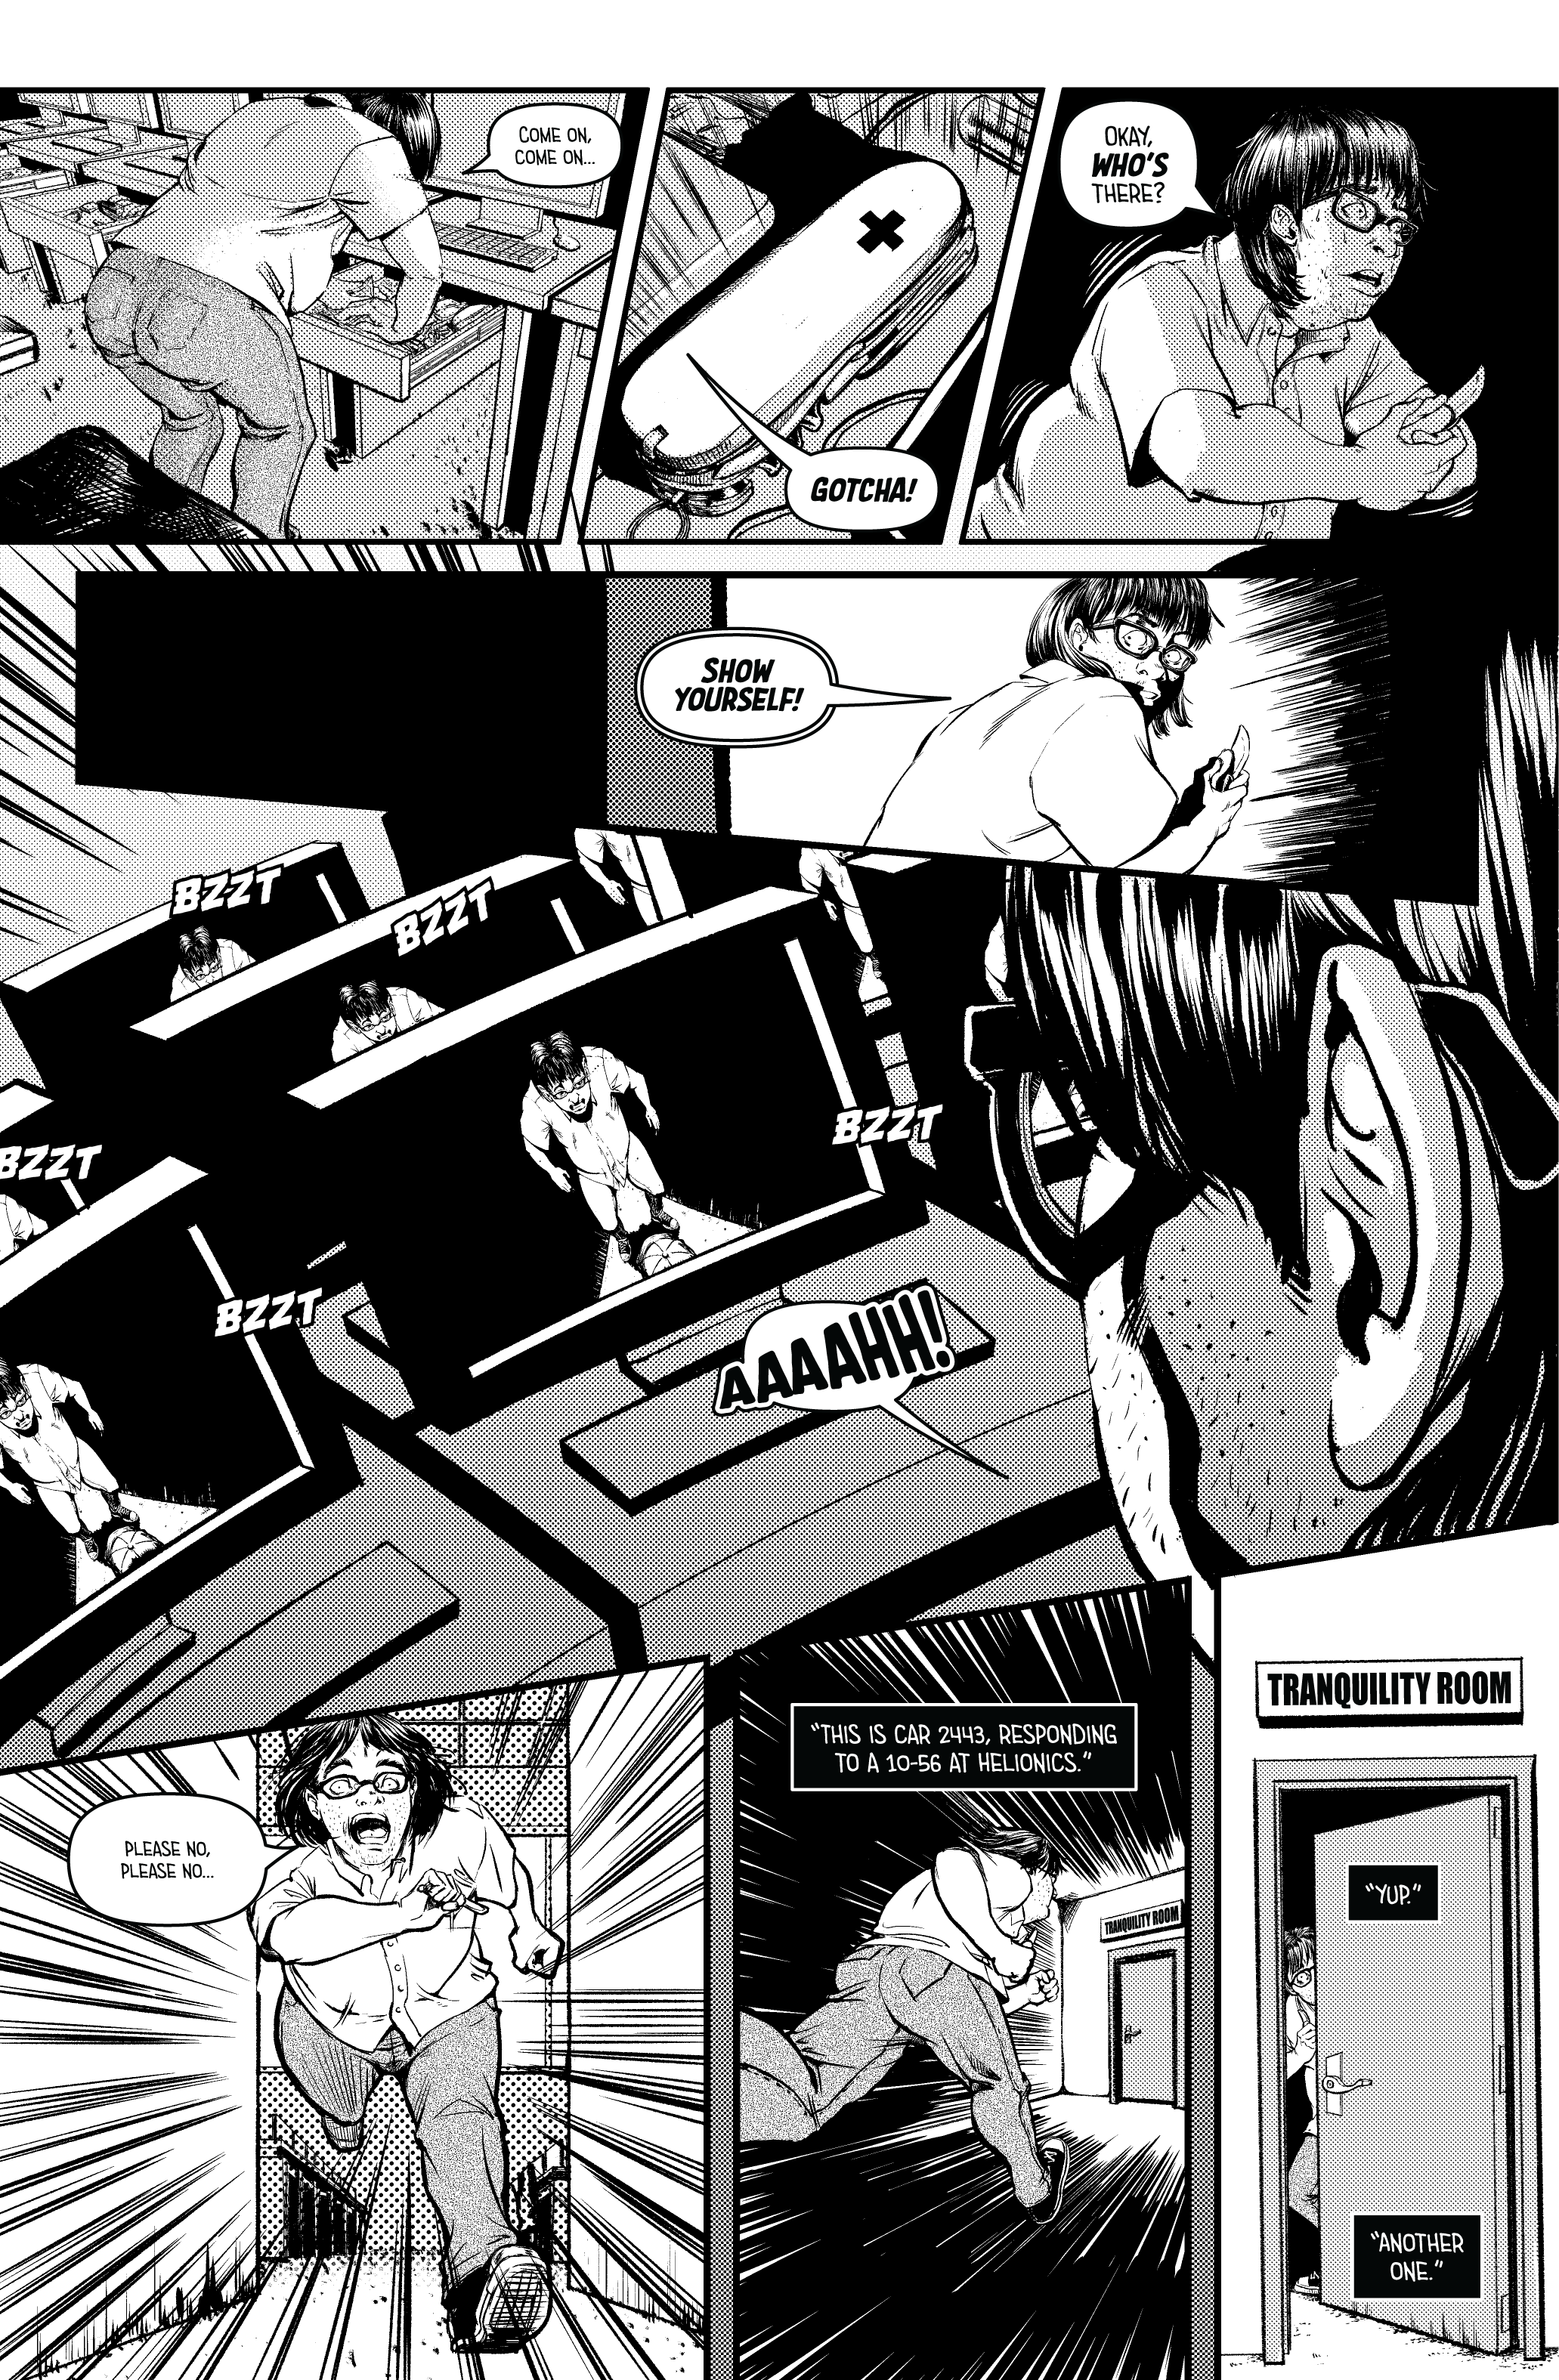 Monocul issue 05 story 03 pg 07 - Content Warning-01.png